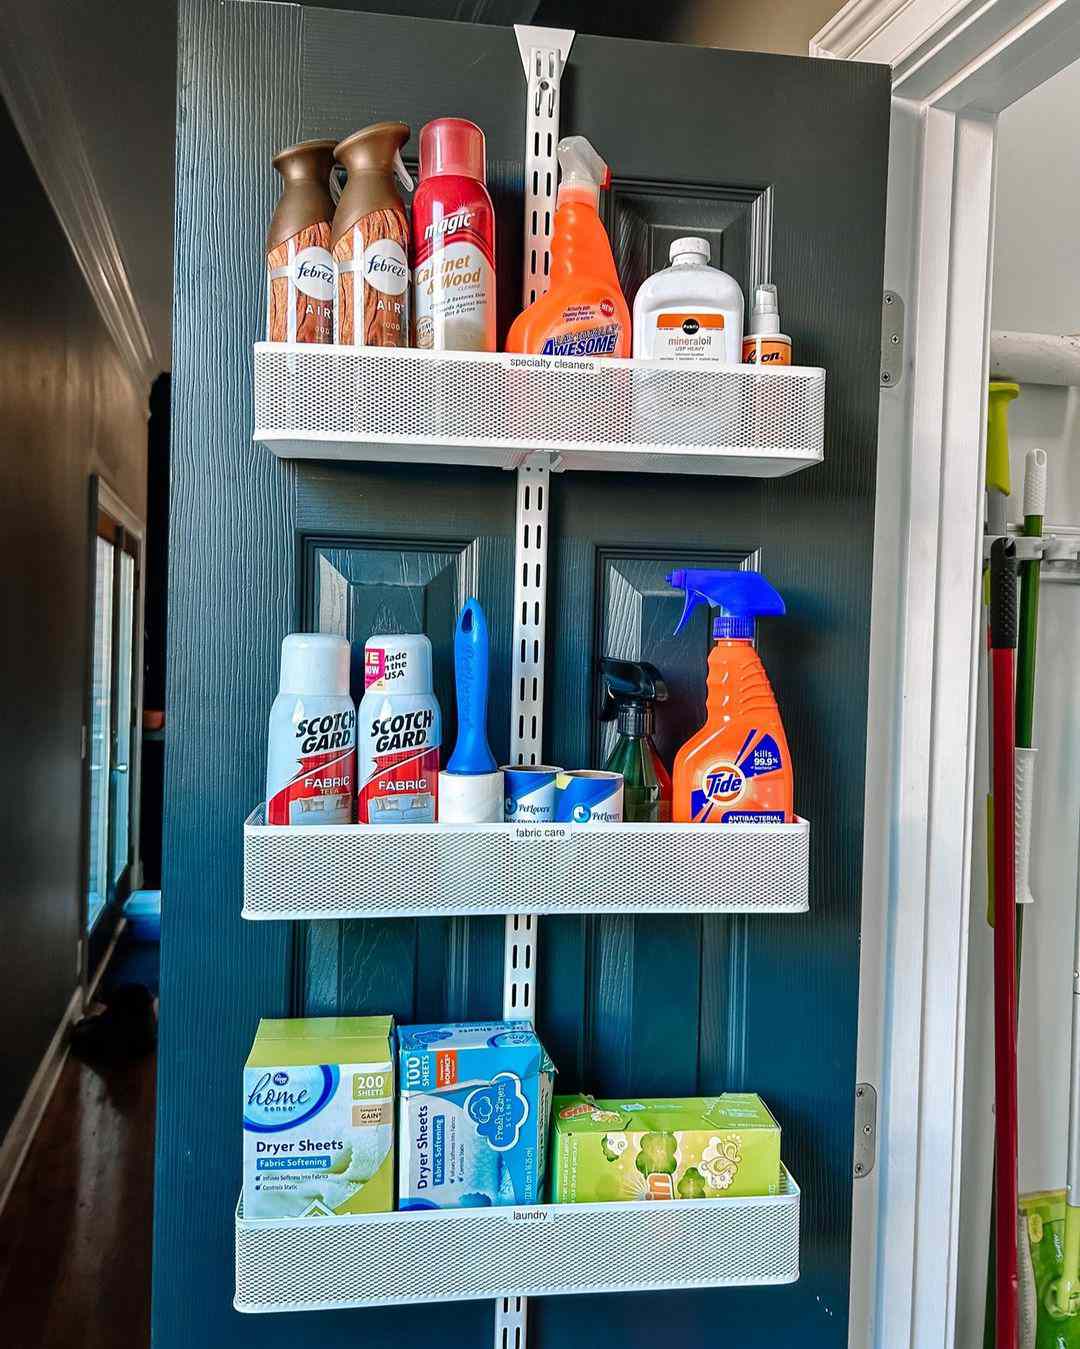 Cleaning supplies stored on an over-the-door rack